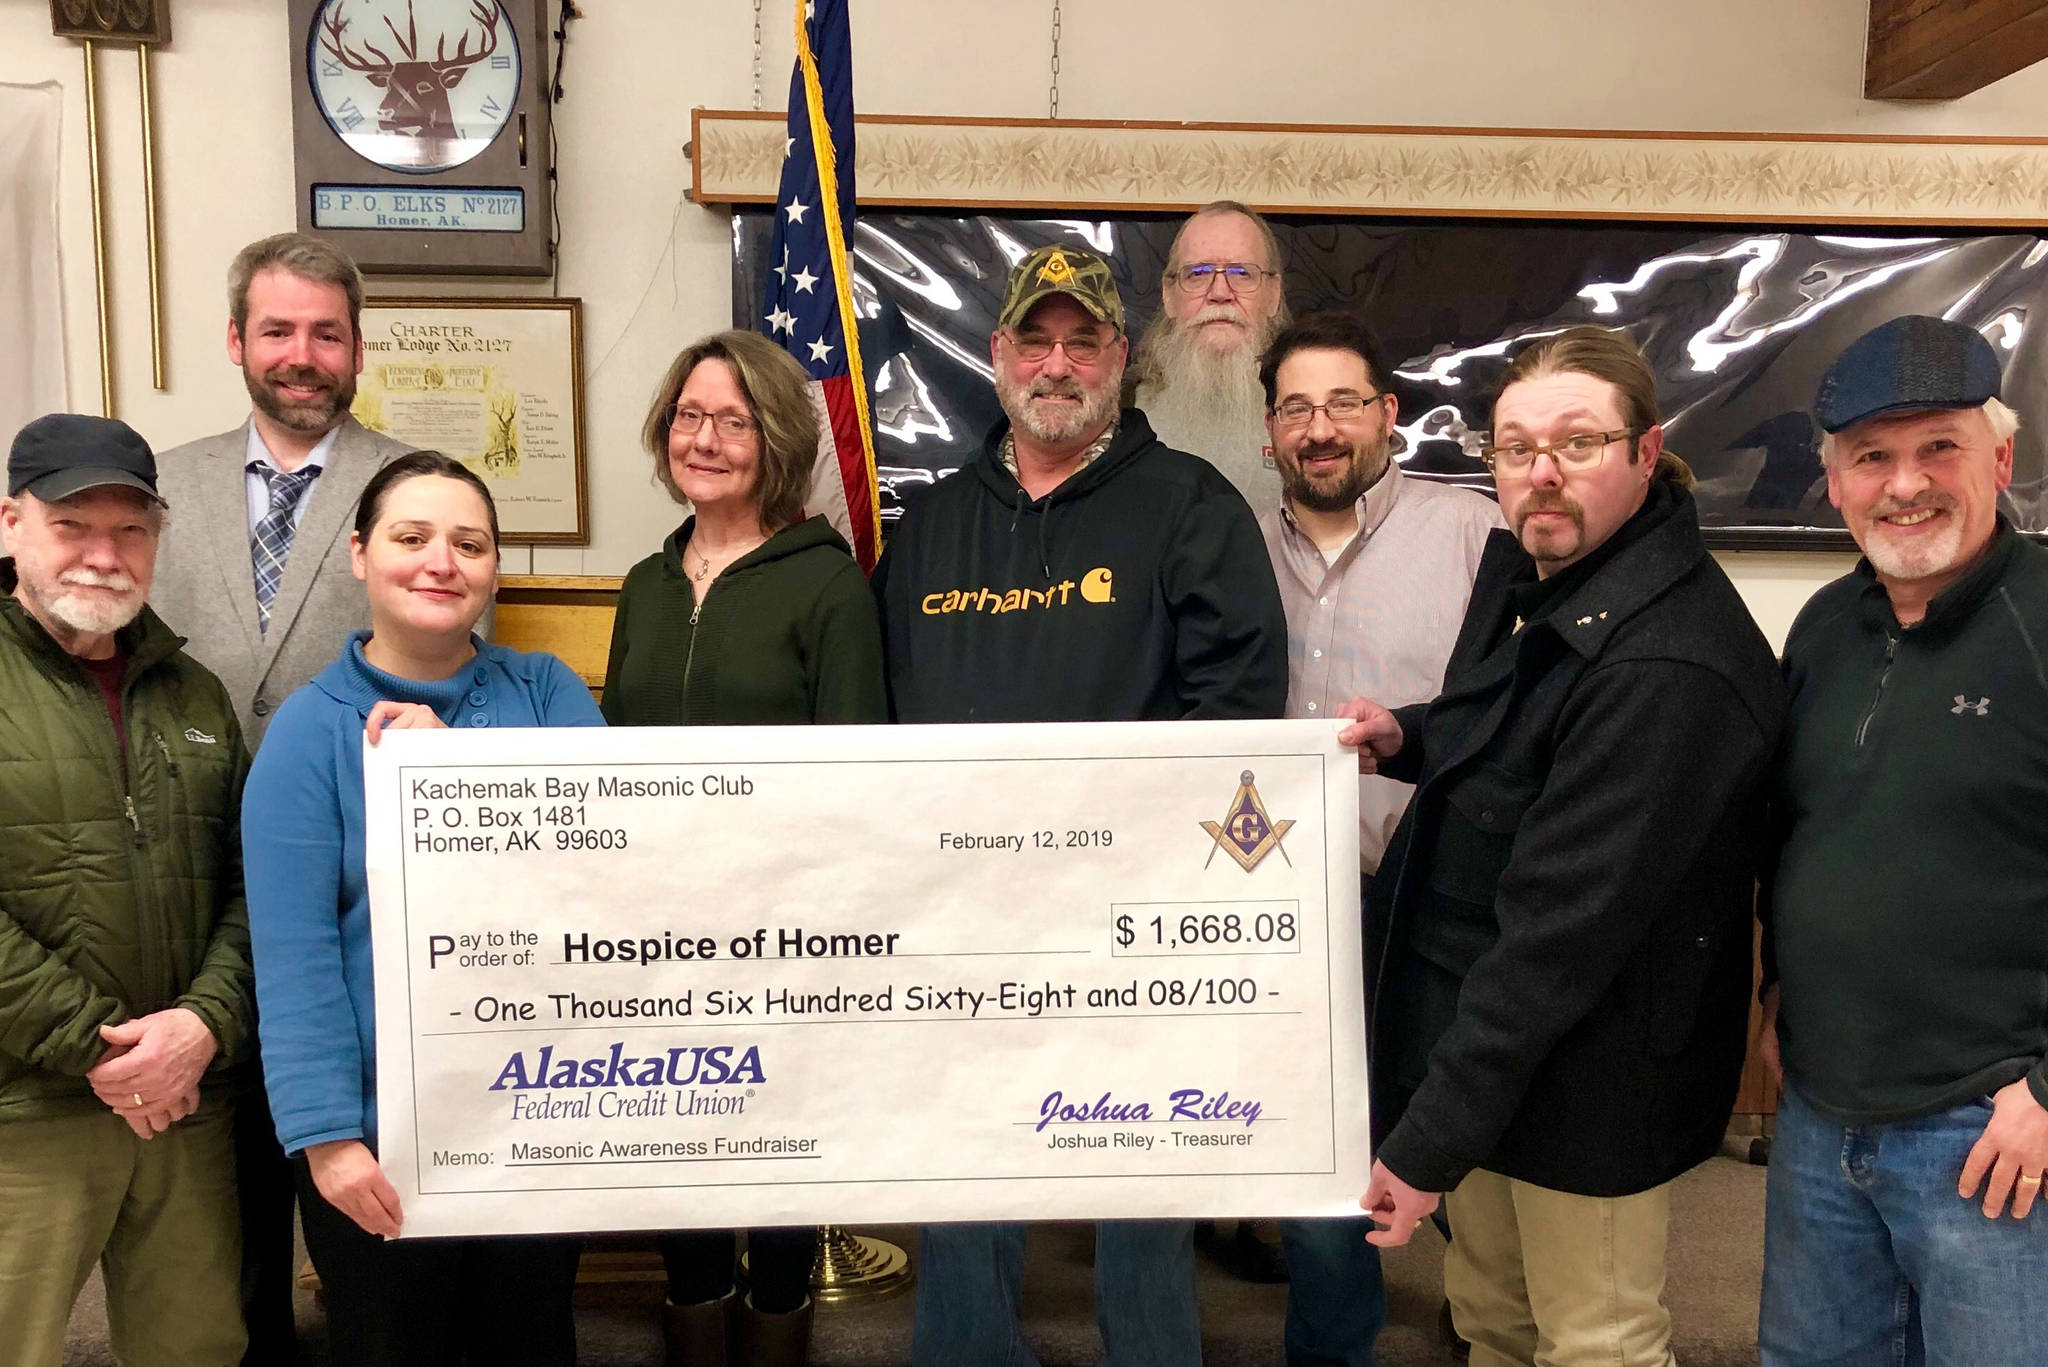 Members of the Kachemak Bay Masonic Club presented Hospice of Homer with a check for $1,668.08 on Feb. 12, 2019, at the Homer Elks Lodge in Homer, Alaska. From left to right are Michael Hawfield, Vern Miller, Jessica Golden, Beth Graber, Barry Haynes, Grady Svoboda, Erik Groves, Joshua Riley and Tom Stroozas. (Photo provided)